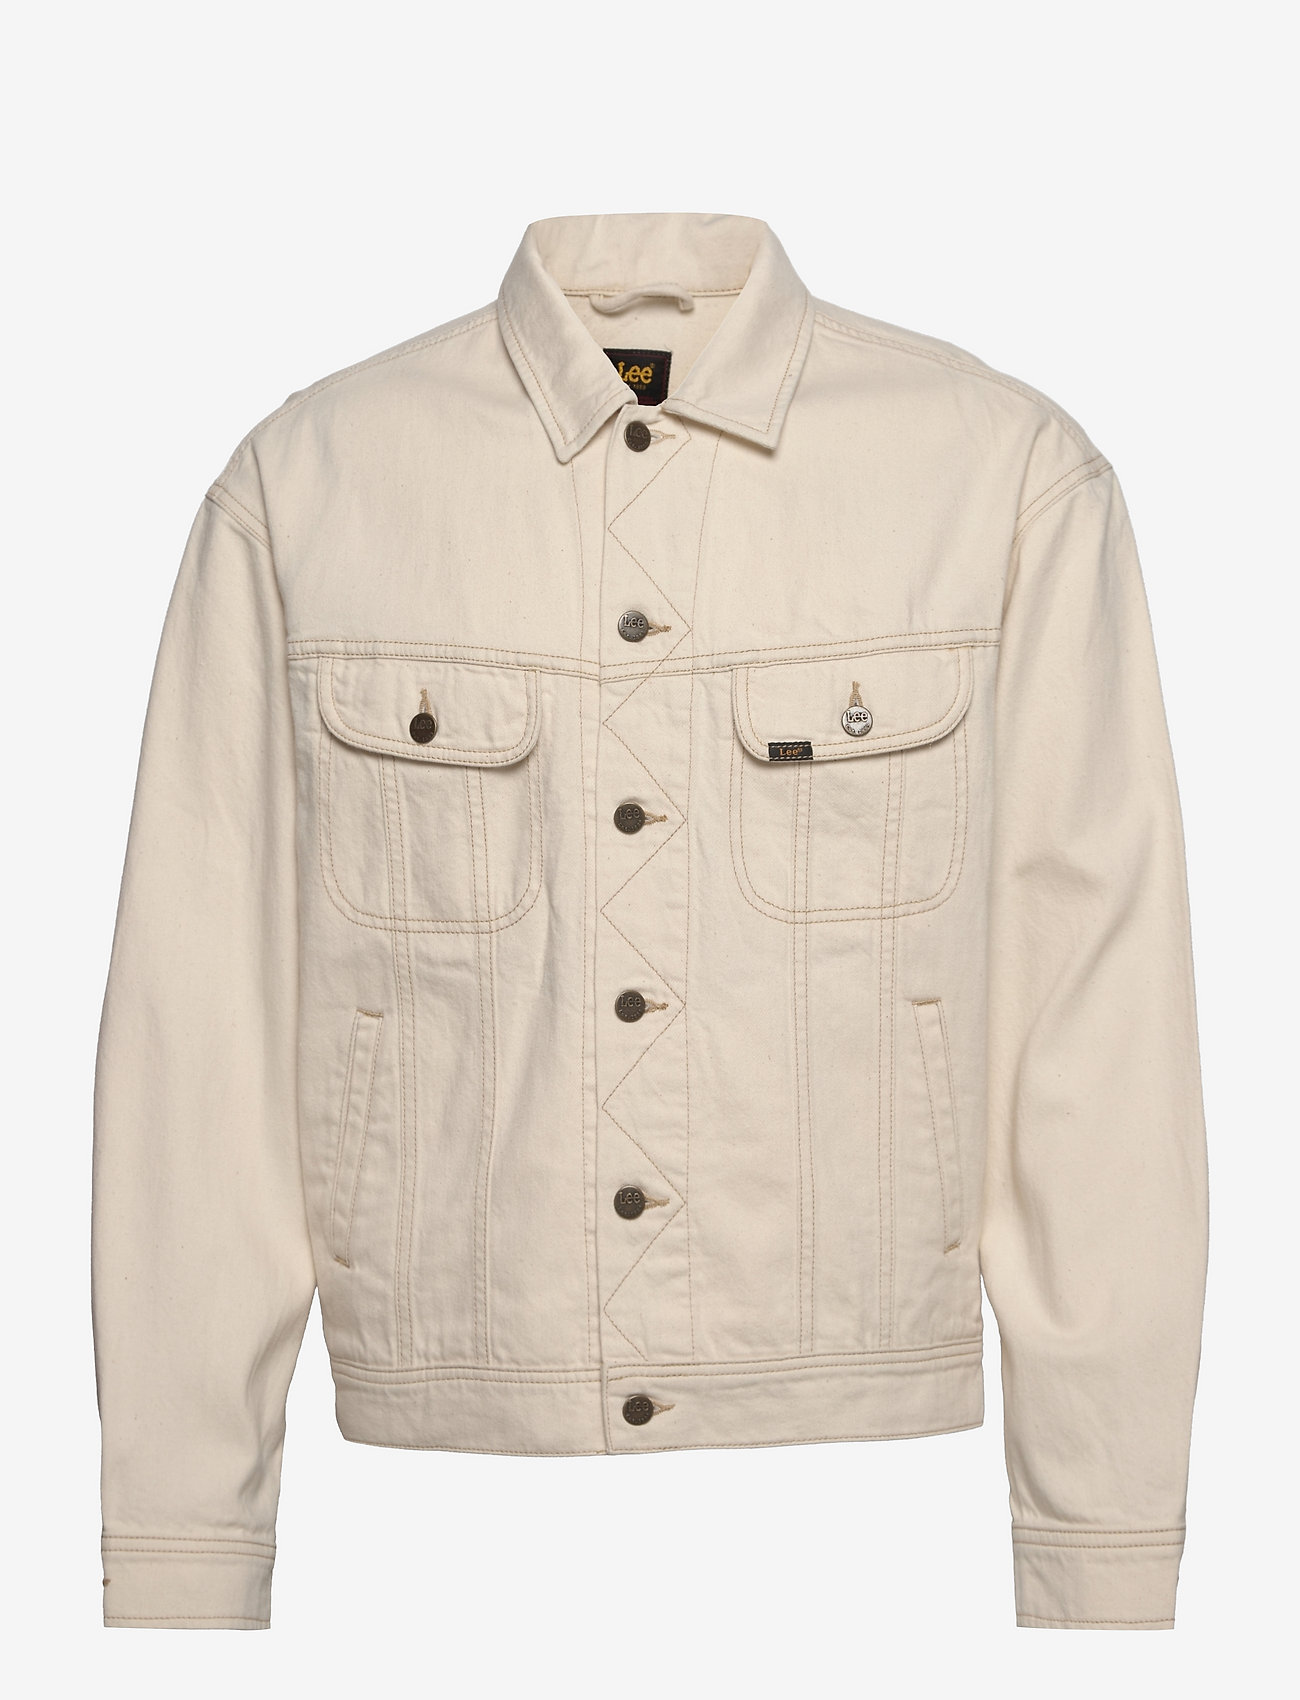 Lee Jeans Relaxed Rider Jacket (Ecru), ( €) | Large selection of outlet-styles  